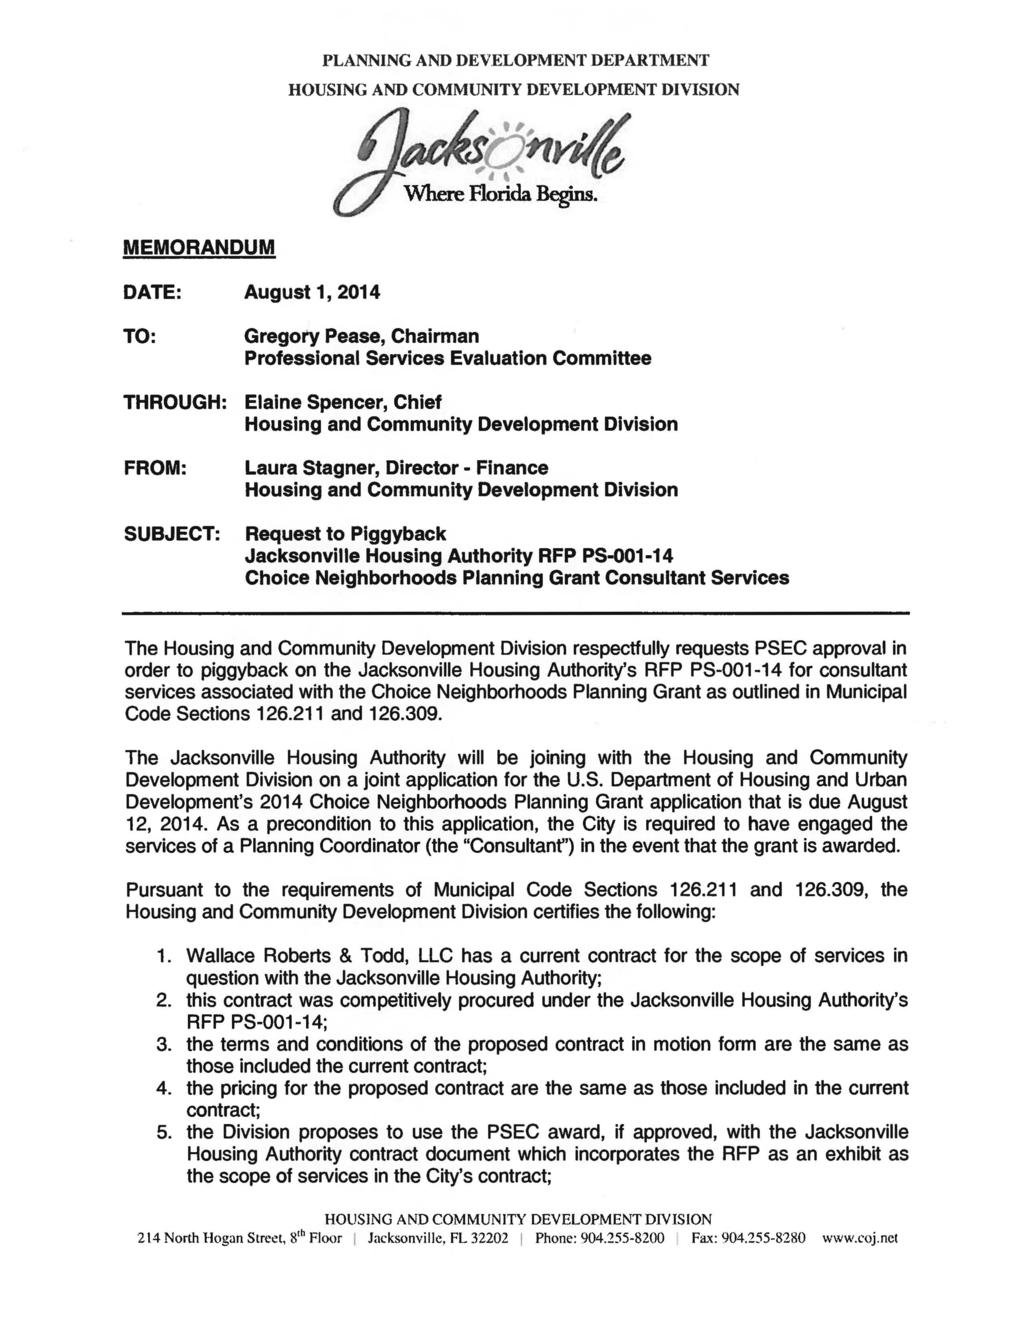 PLANNING AND DEVELOPMENT DEPARTMENT HOUSING AND COMMUNITY DEVELOPMENT DIVISION MEMORANDUM DATE: August 1, 2014 TO: Gregory Pease, Chairman Professional Services Evaluation Committee THROUGH: Elaine